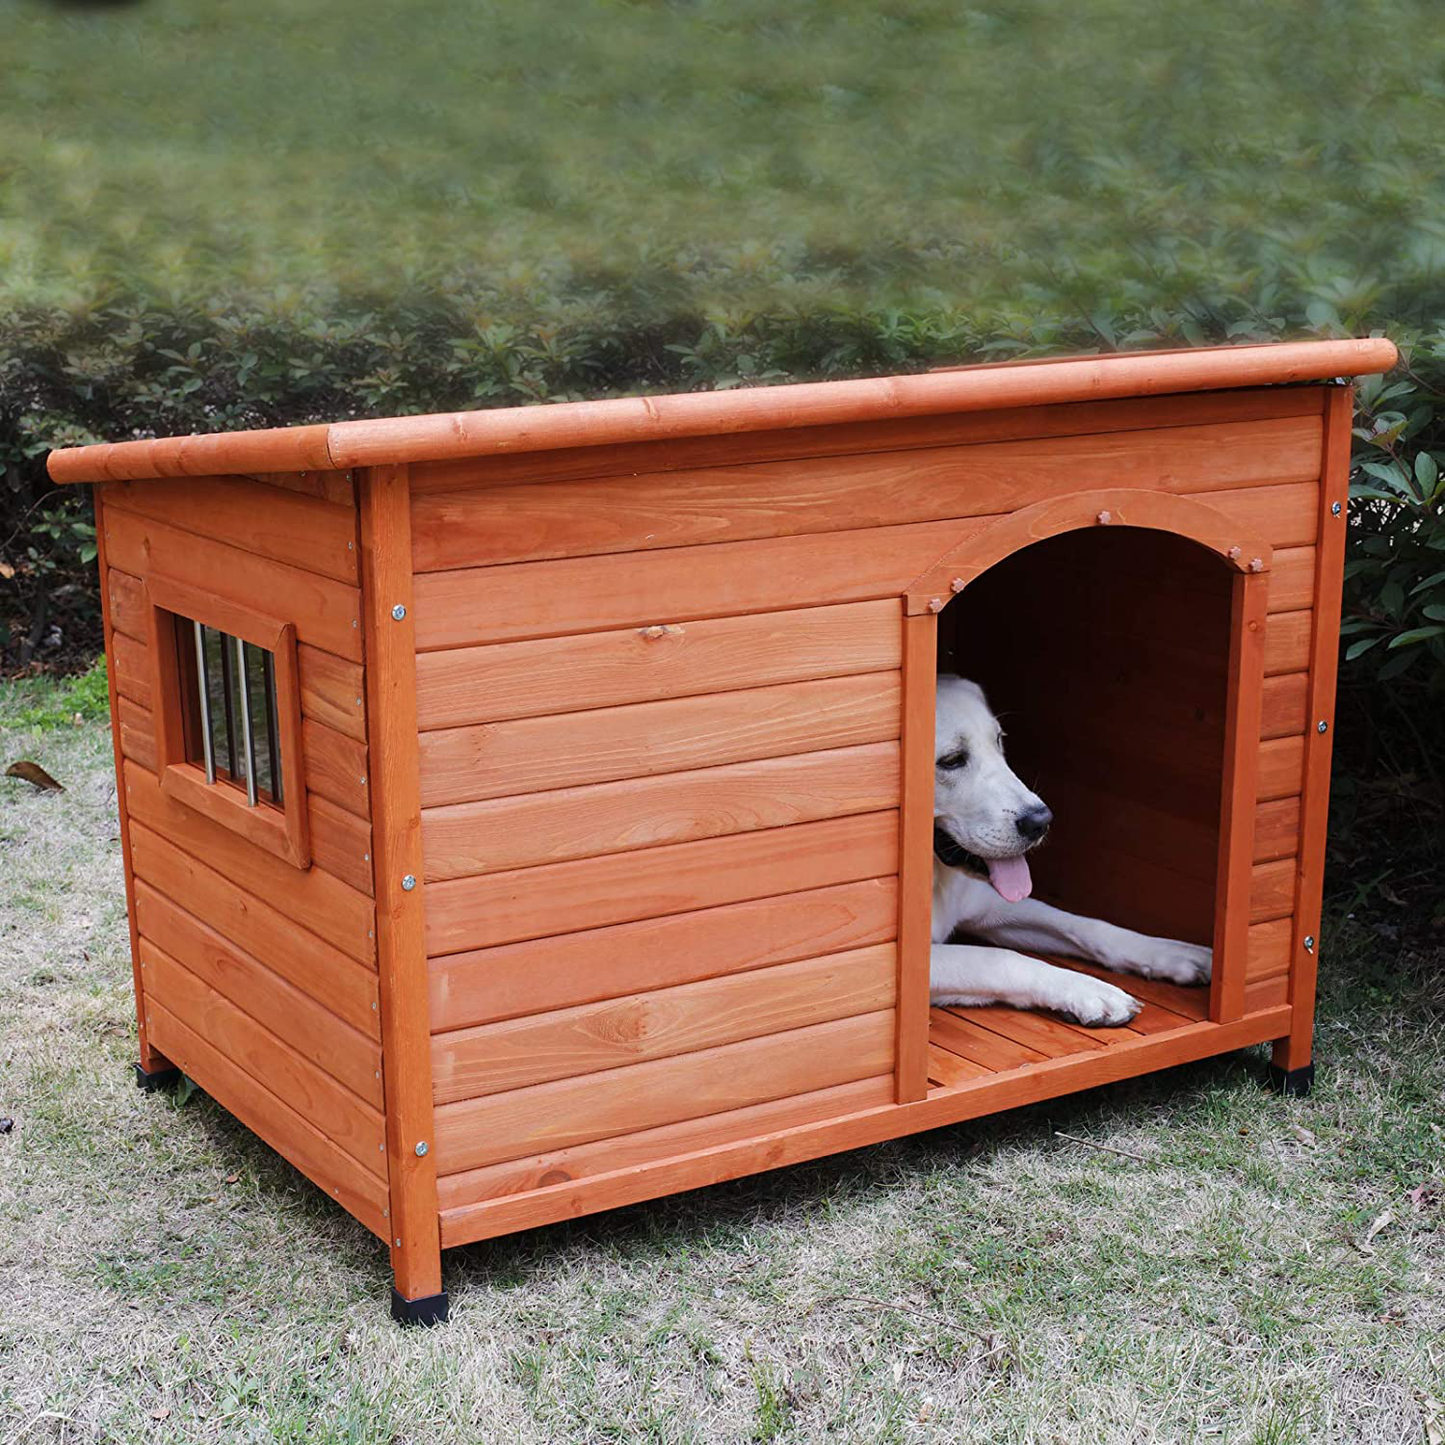 Rockever Wood Dog Houses Outdoor Insulated, Weatherproof Dog Houses outside with Door Cute Wooden